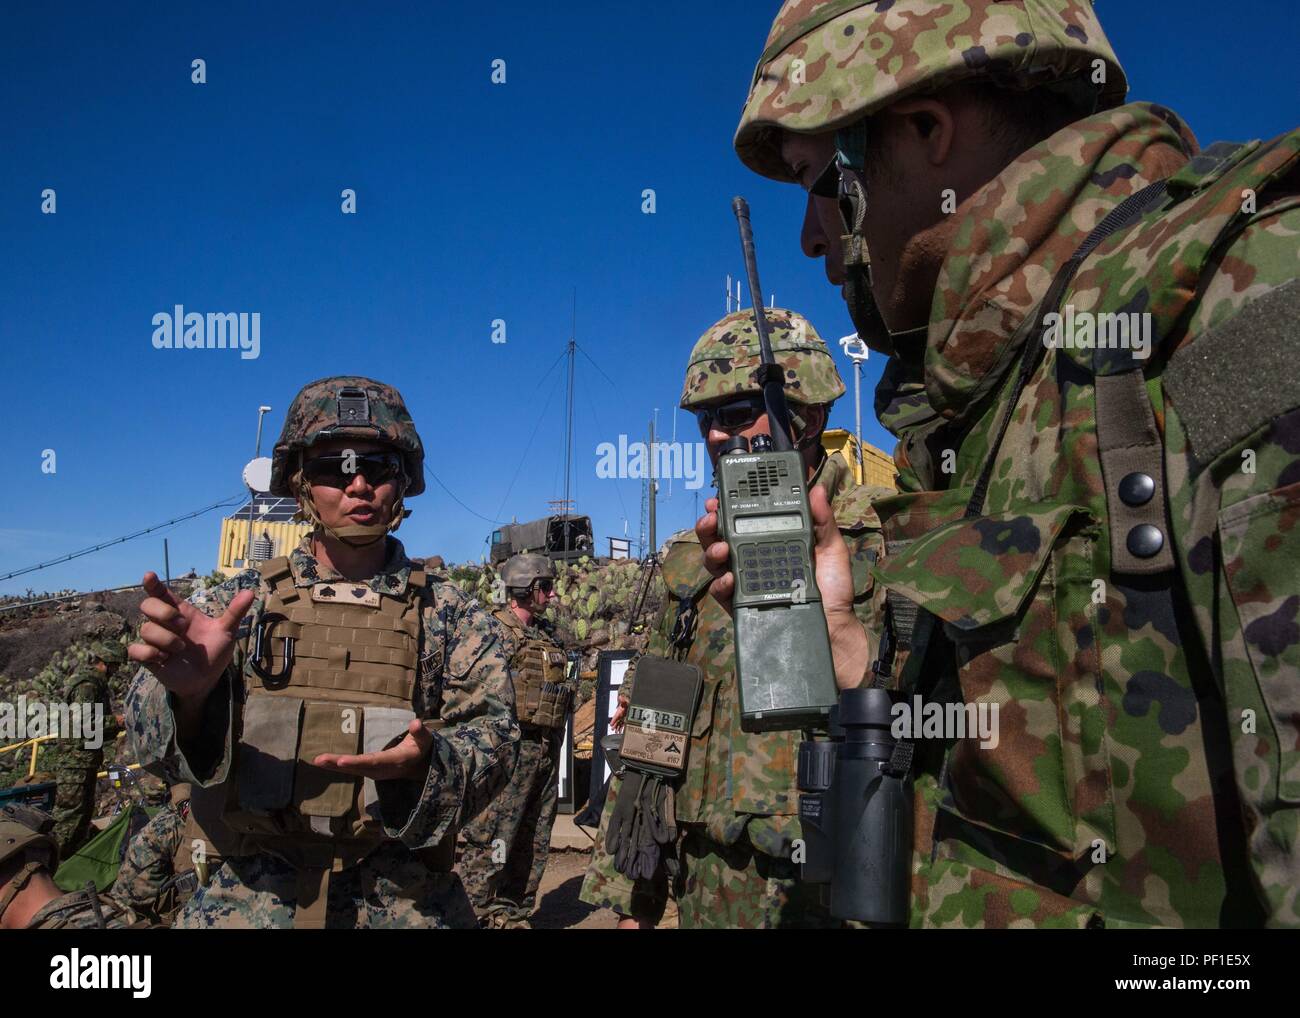 A U.S. Marine Corps interpreter attached to 1st Air Naval Gunfire Liaison Company translates radio messages for a soldier with Western Army Infantry Regiment, Japan Ground Self-Defense Force, during a supporting arms coordination center exercise, (SACCEX), on San Clemente Island, Feb. 22, 2016, as part of Exercise Iron Fist 2016. SACCEX  serves as a cooperative learning tool for the US-Japan partnership through the operation of a SACC, which has developed the USMC and JGSDF’s ability to intergrate naval gunfire, mortars and close-air support  as a combined force. (U.S. Marine Corps photo by La Stock Photo